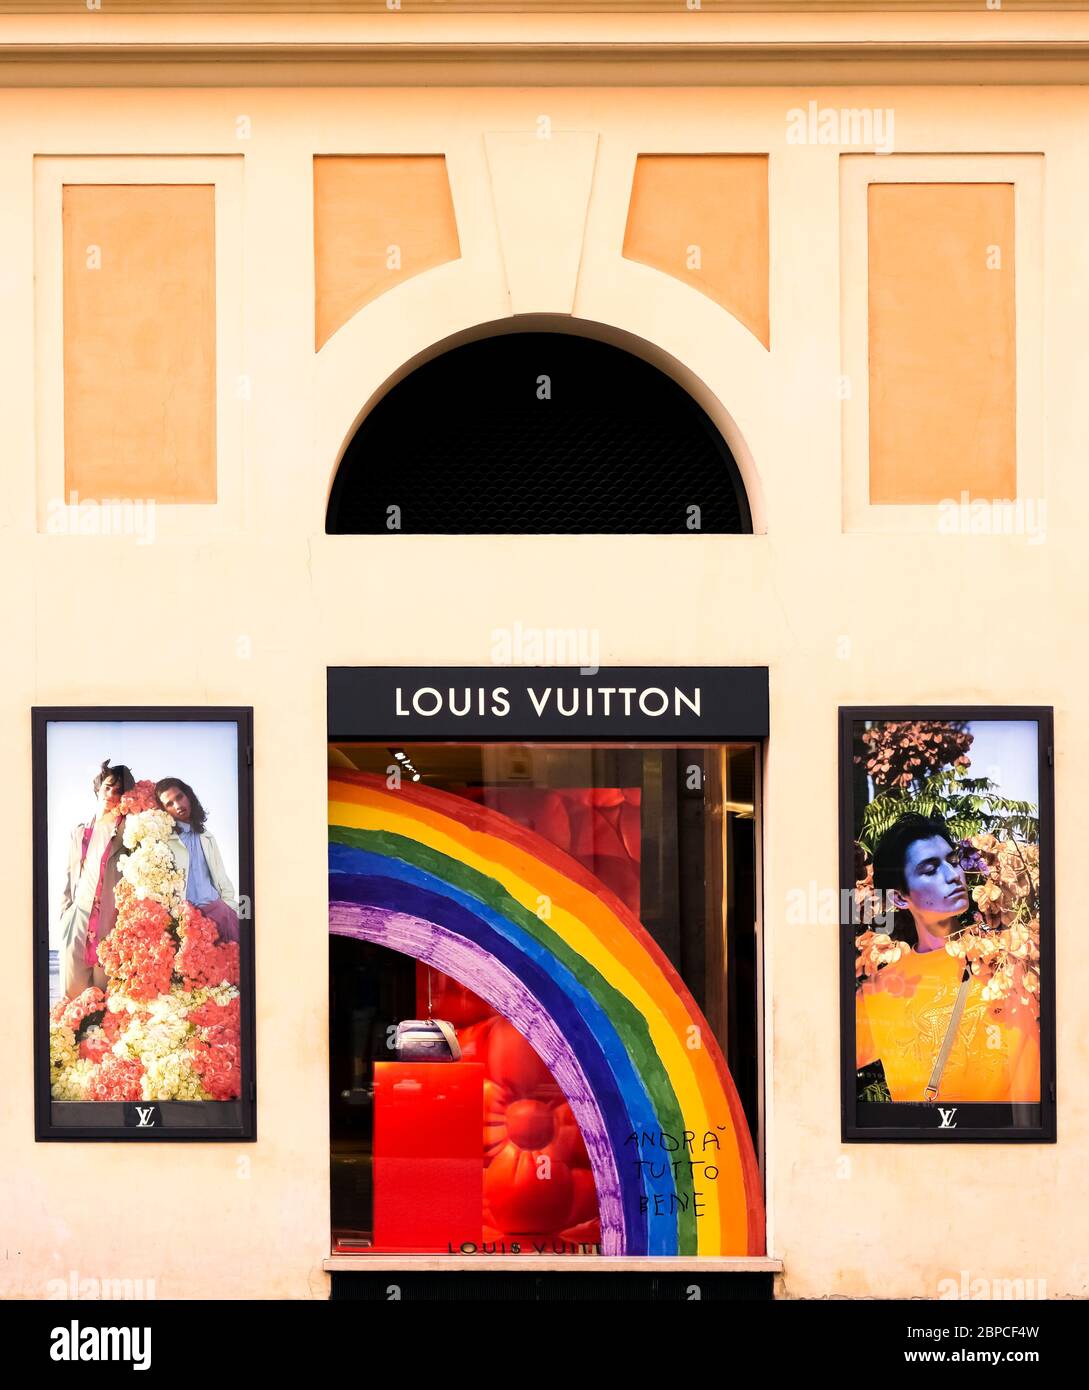 Louis Vuitton - Postcards from the Future